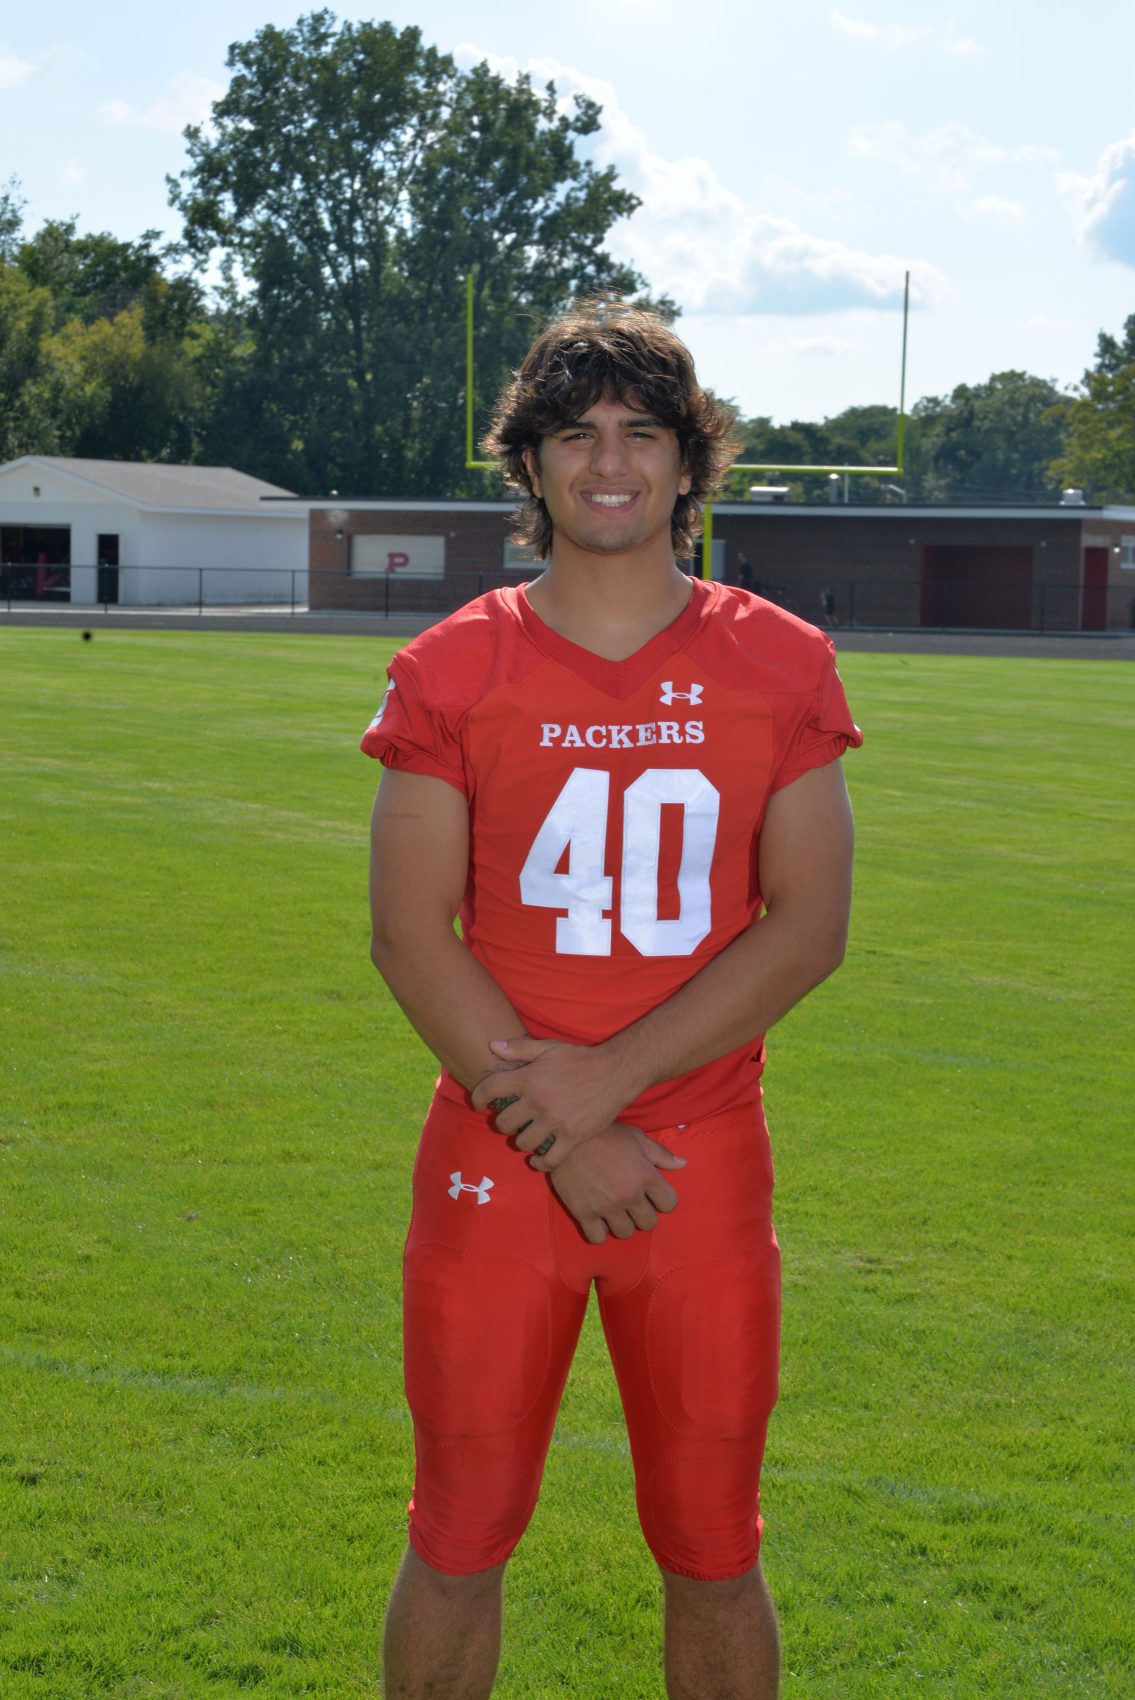 Fremont’s Romero named LSJ defensive player of the month